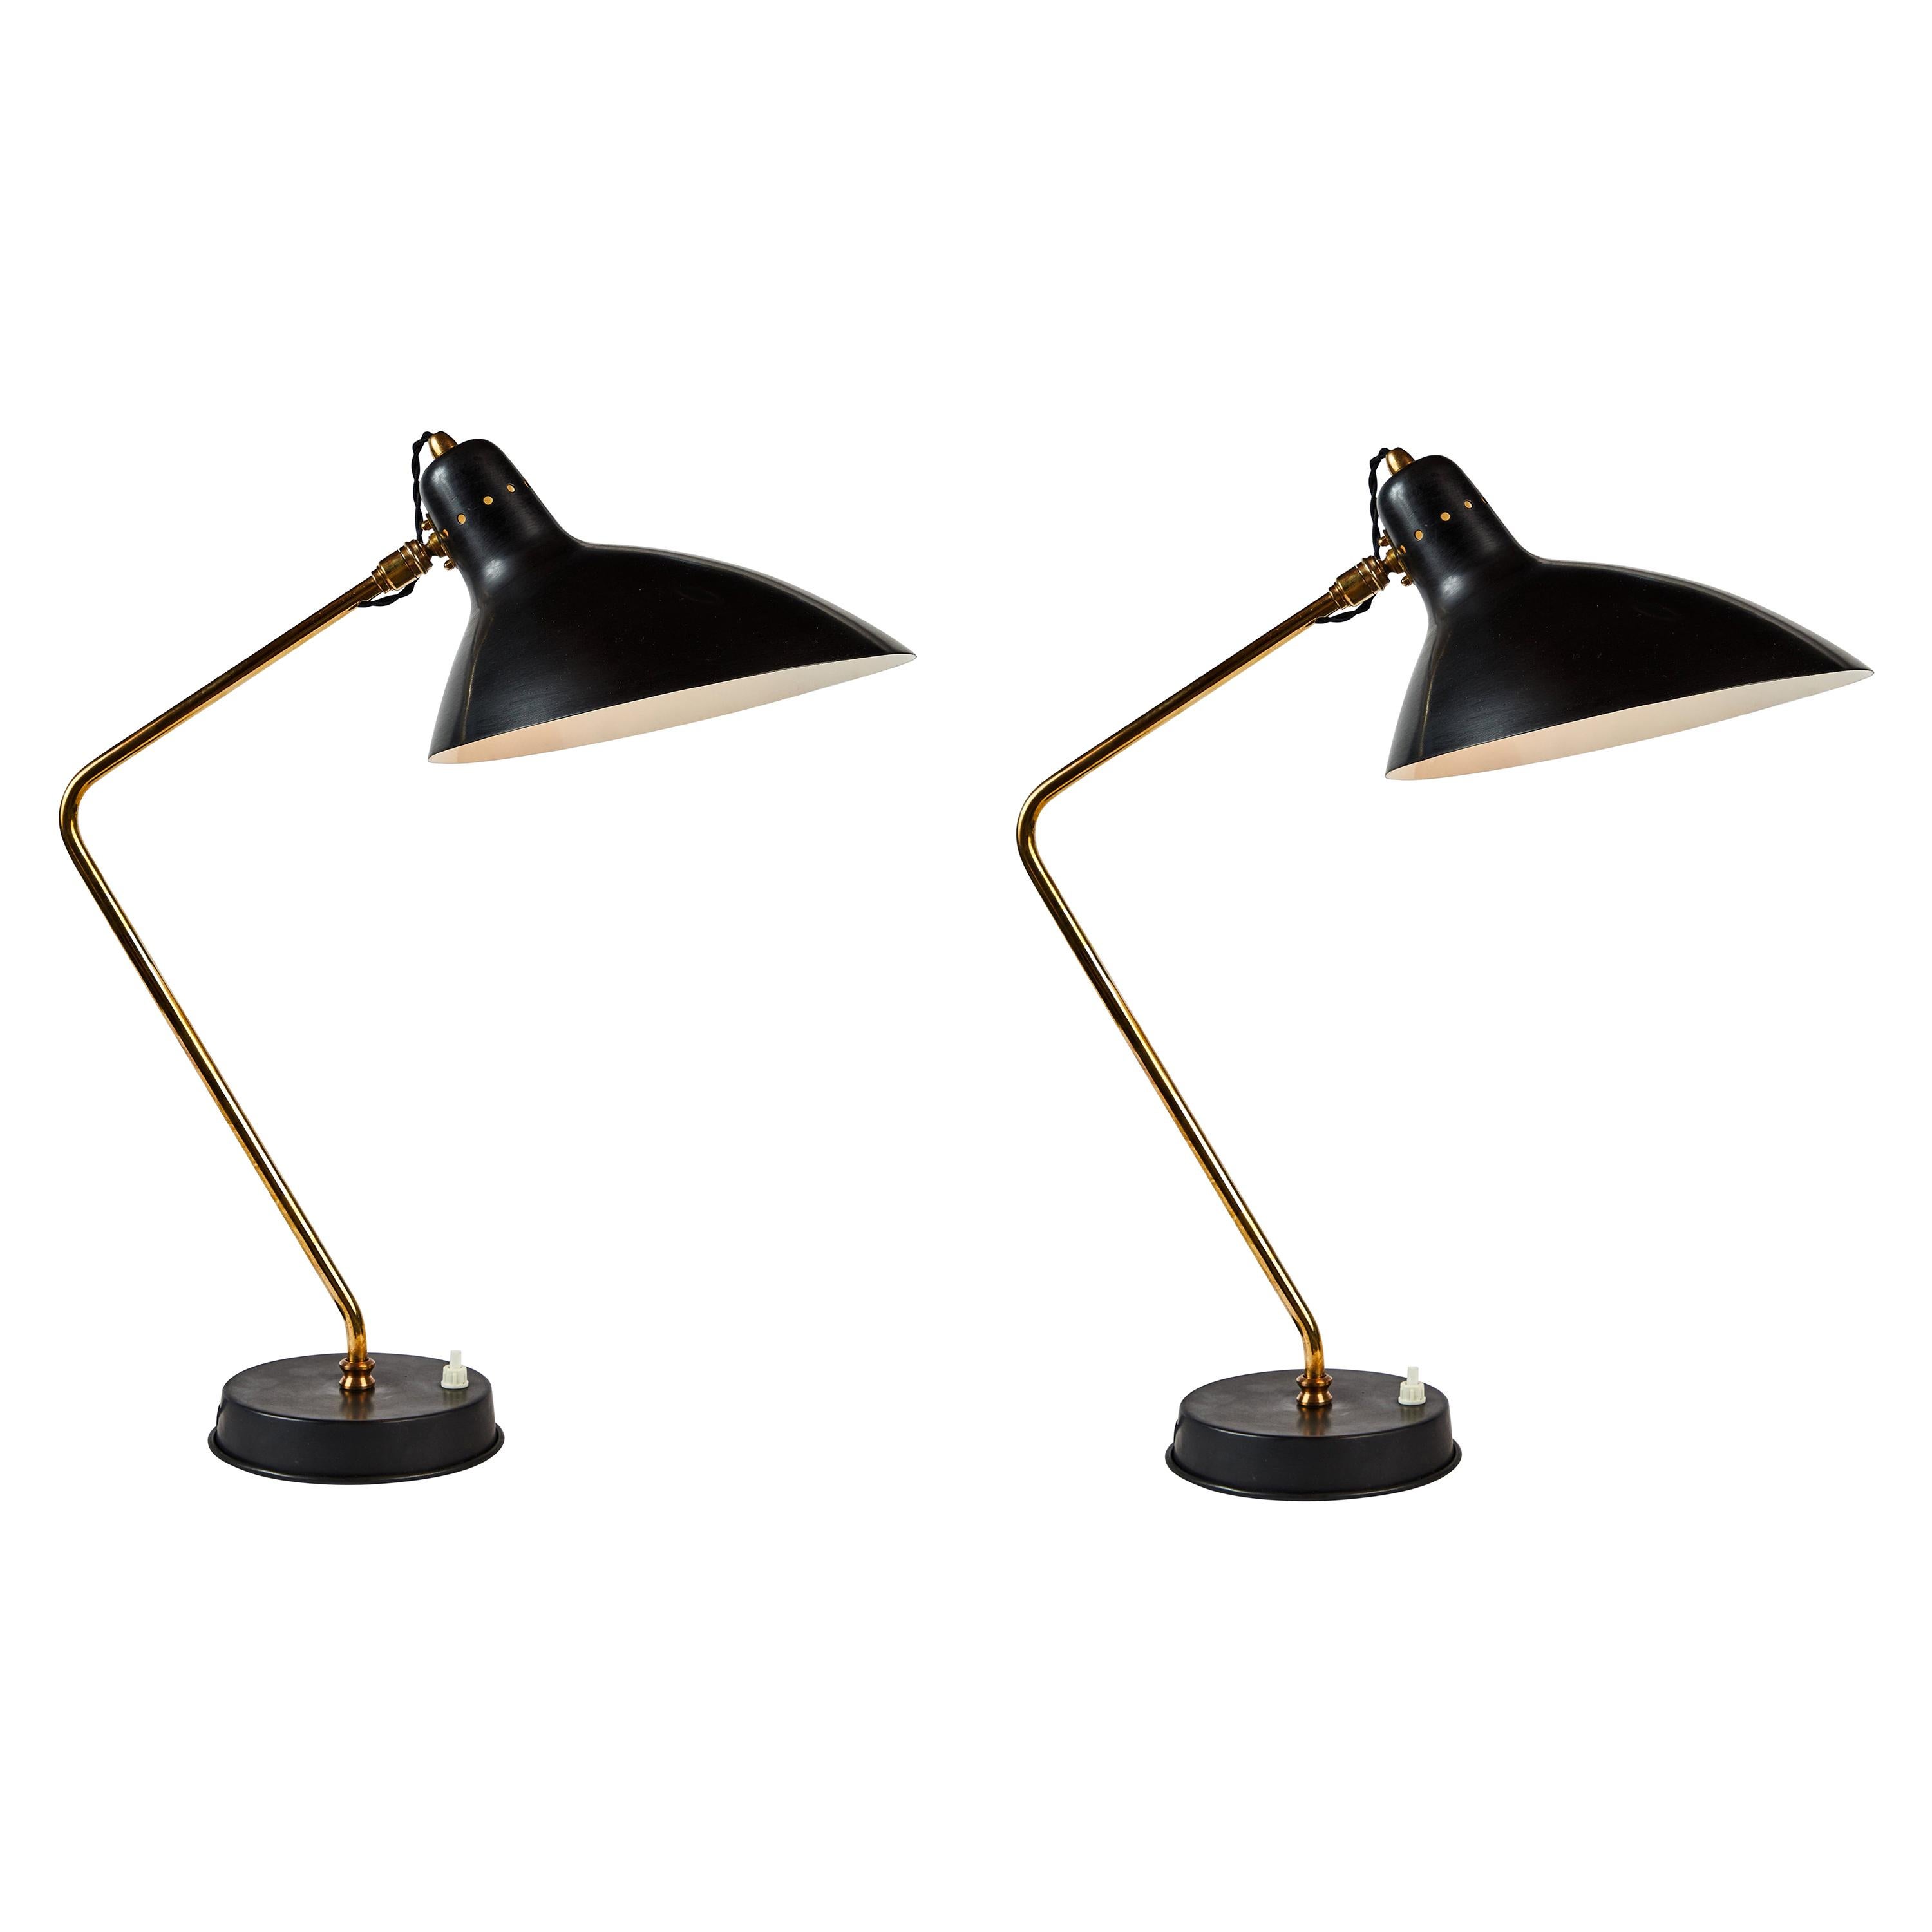 Pair of 1950s Boris Lacroix table lamps. This rare and elegant table lamp is executed in black metal and brass, France, circa 1950s. Shade rotates freely on brass ball joint for high adjustability. A celebrated Art Deco lighting designer who